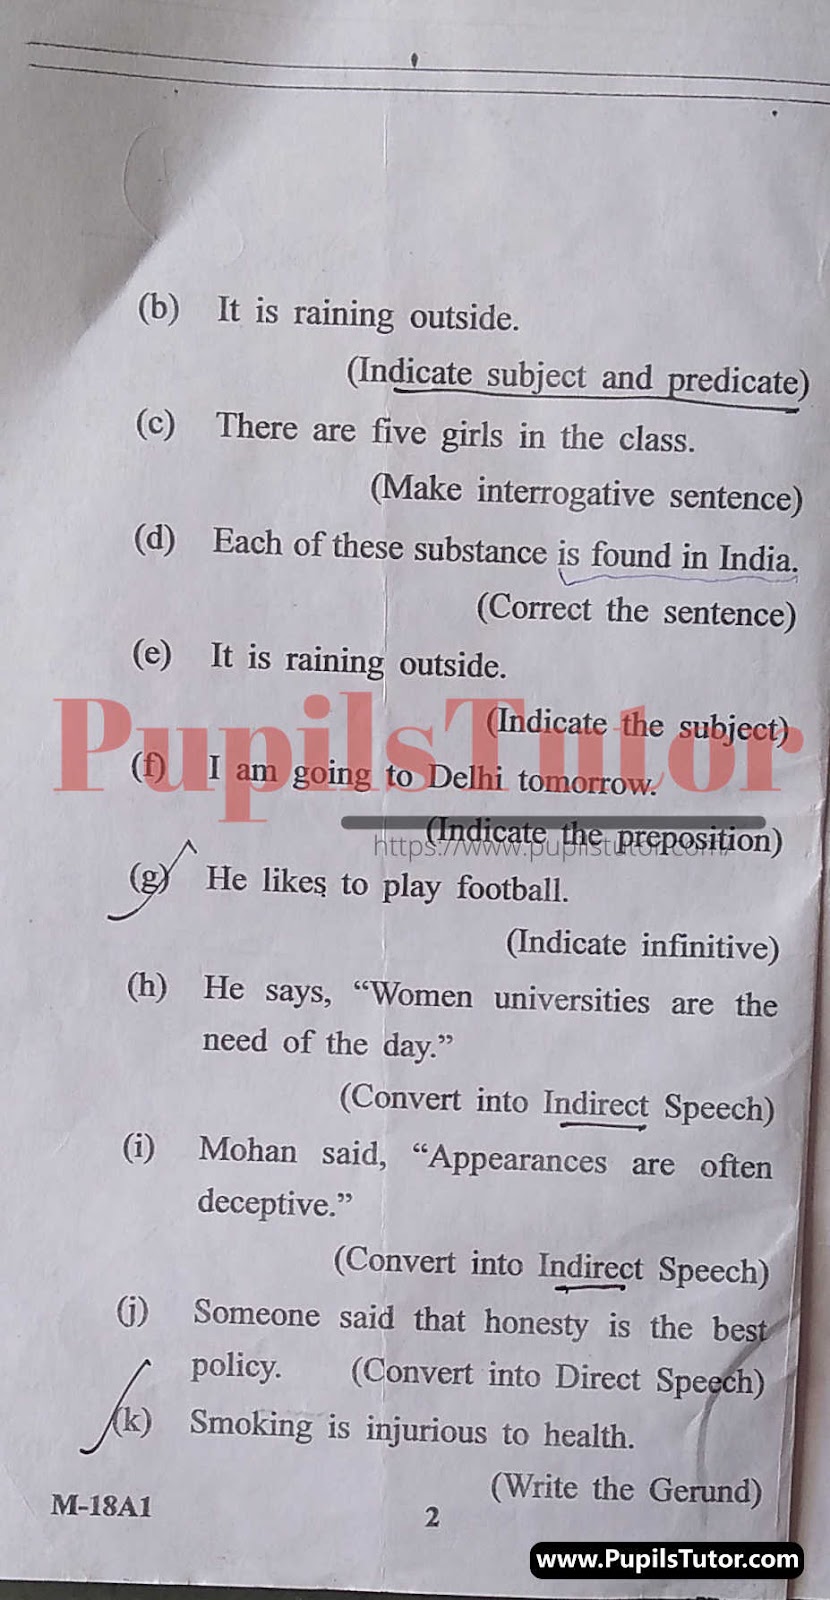 M.D. University B.Tech English Language Skills Second Semester Important Question Answer And Solution - www.pupilstutor.com (Paper Page Number 2)